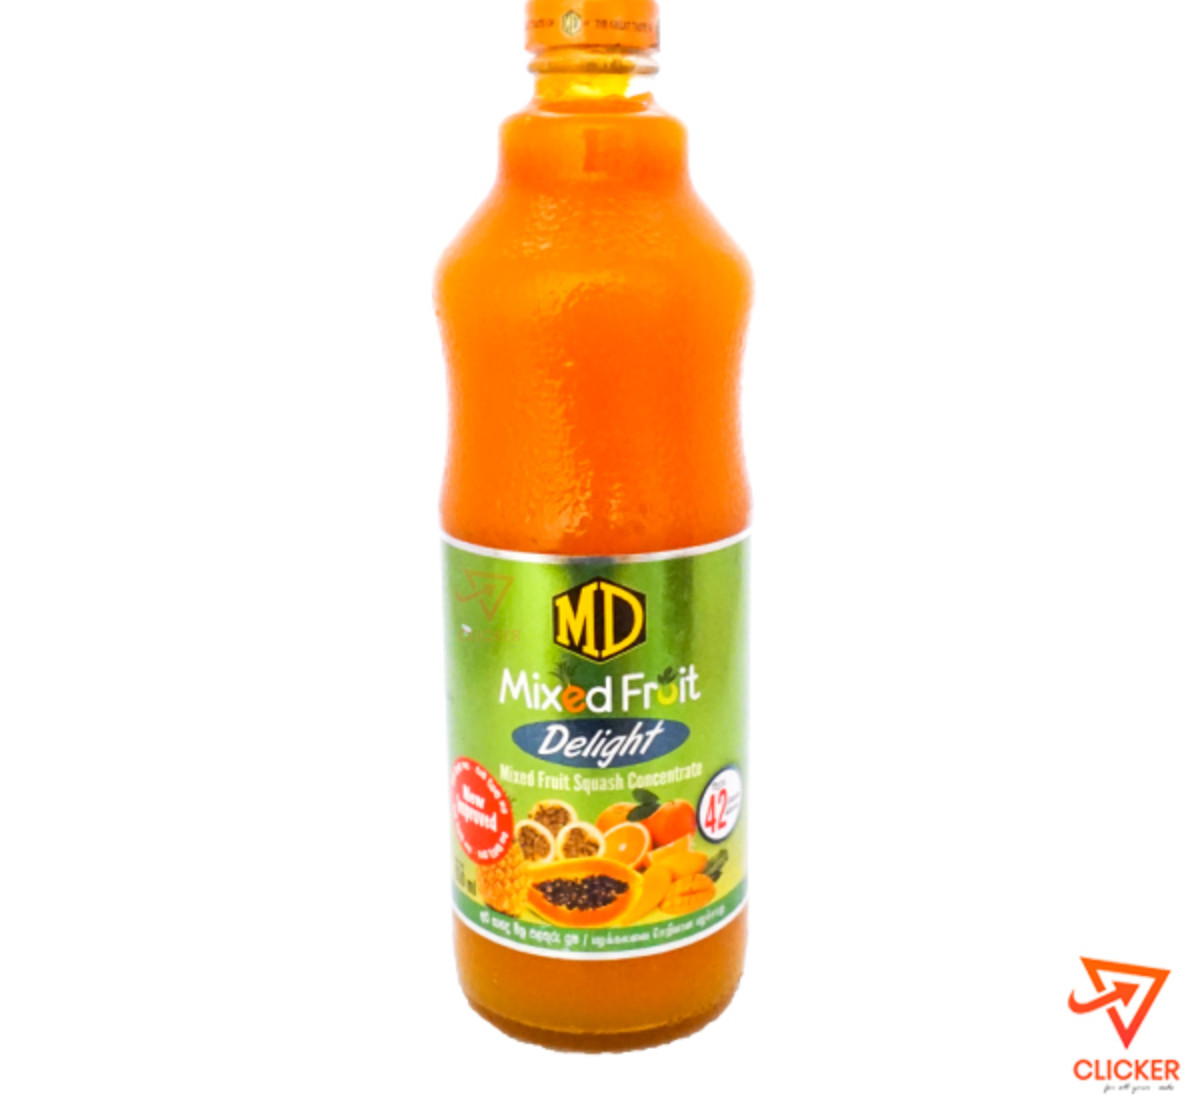 Clicker product 850ml MD mixed fruit delight 1162